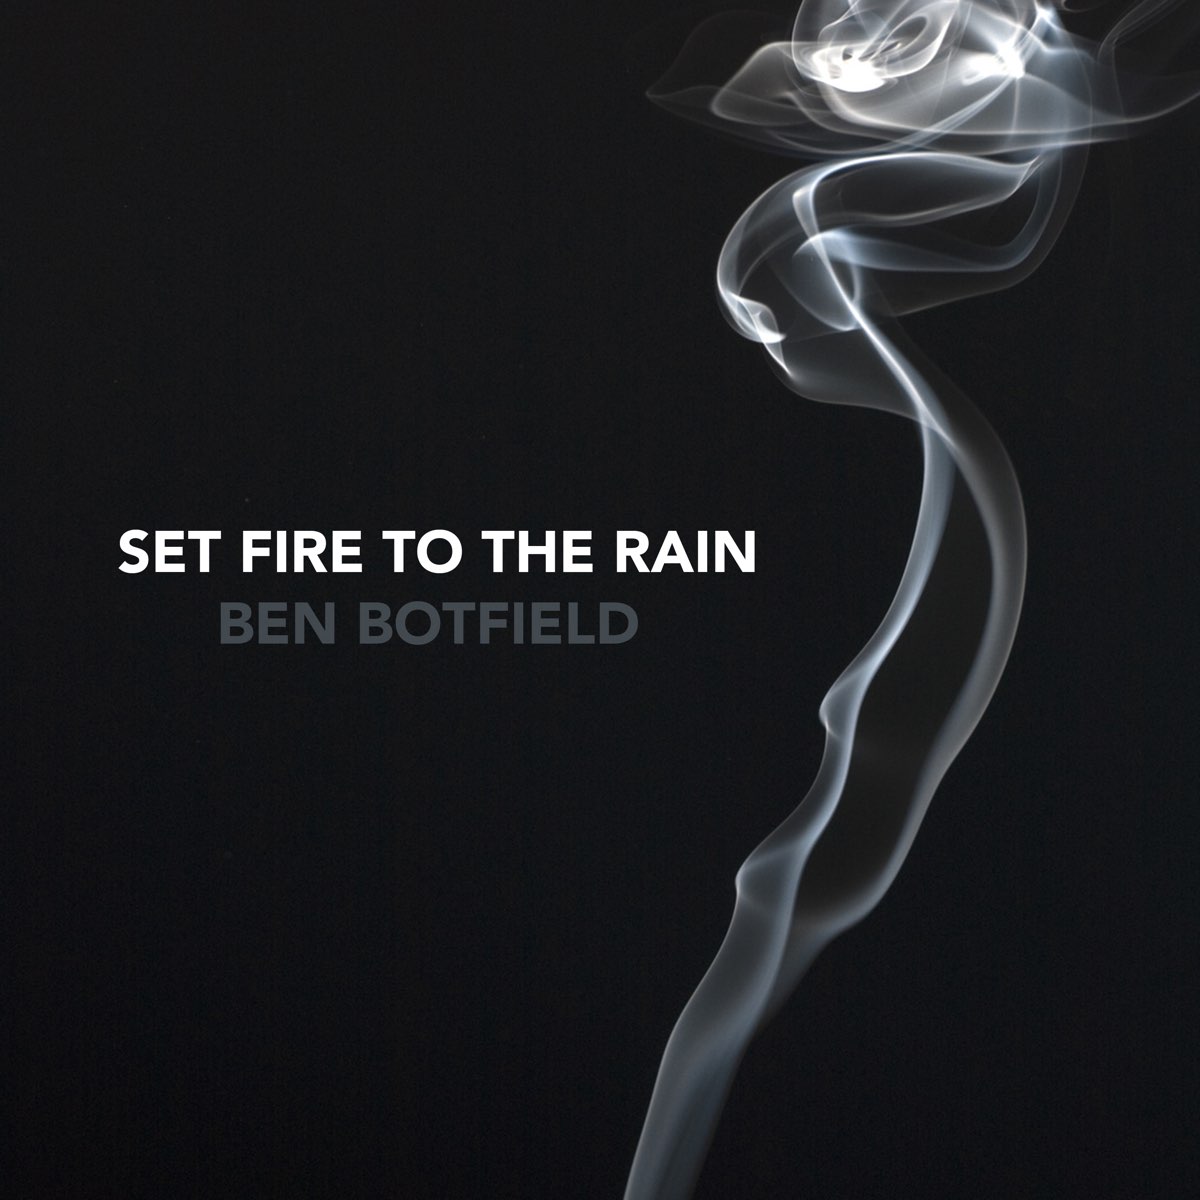 Fire to the rain speed up. Set Fire to the Rain текст. Set Fire to the Rain. No resolve Set Fire to the Rain. Set Fire to the Rain Spotify.